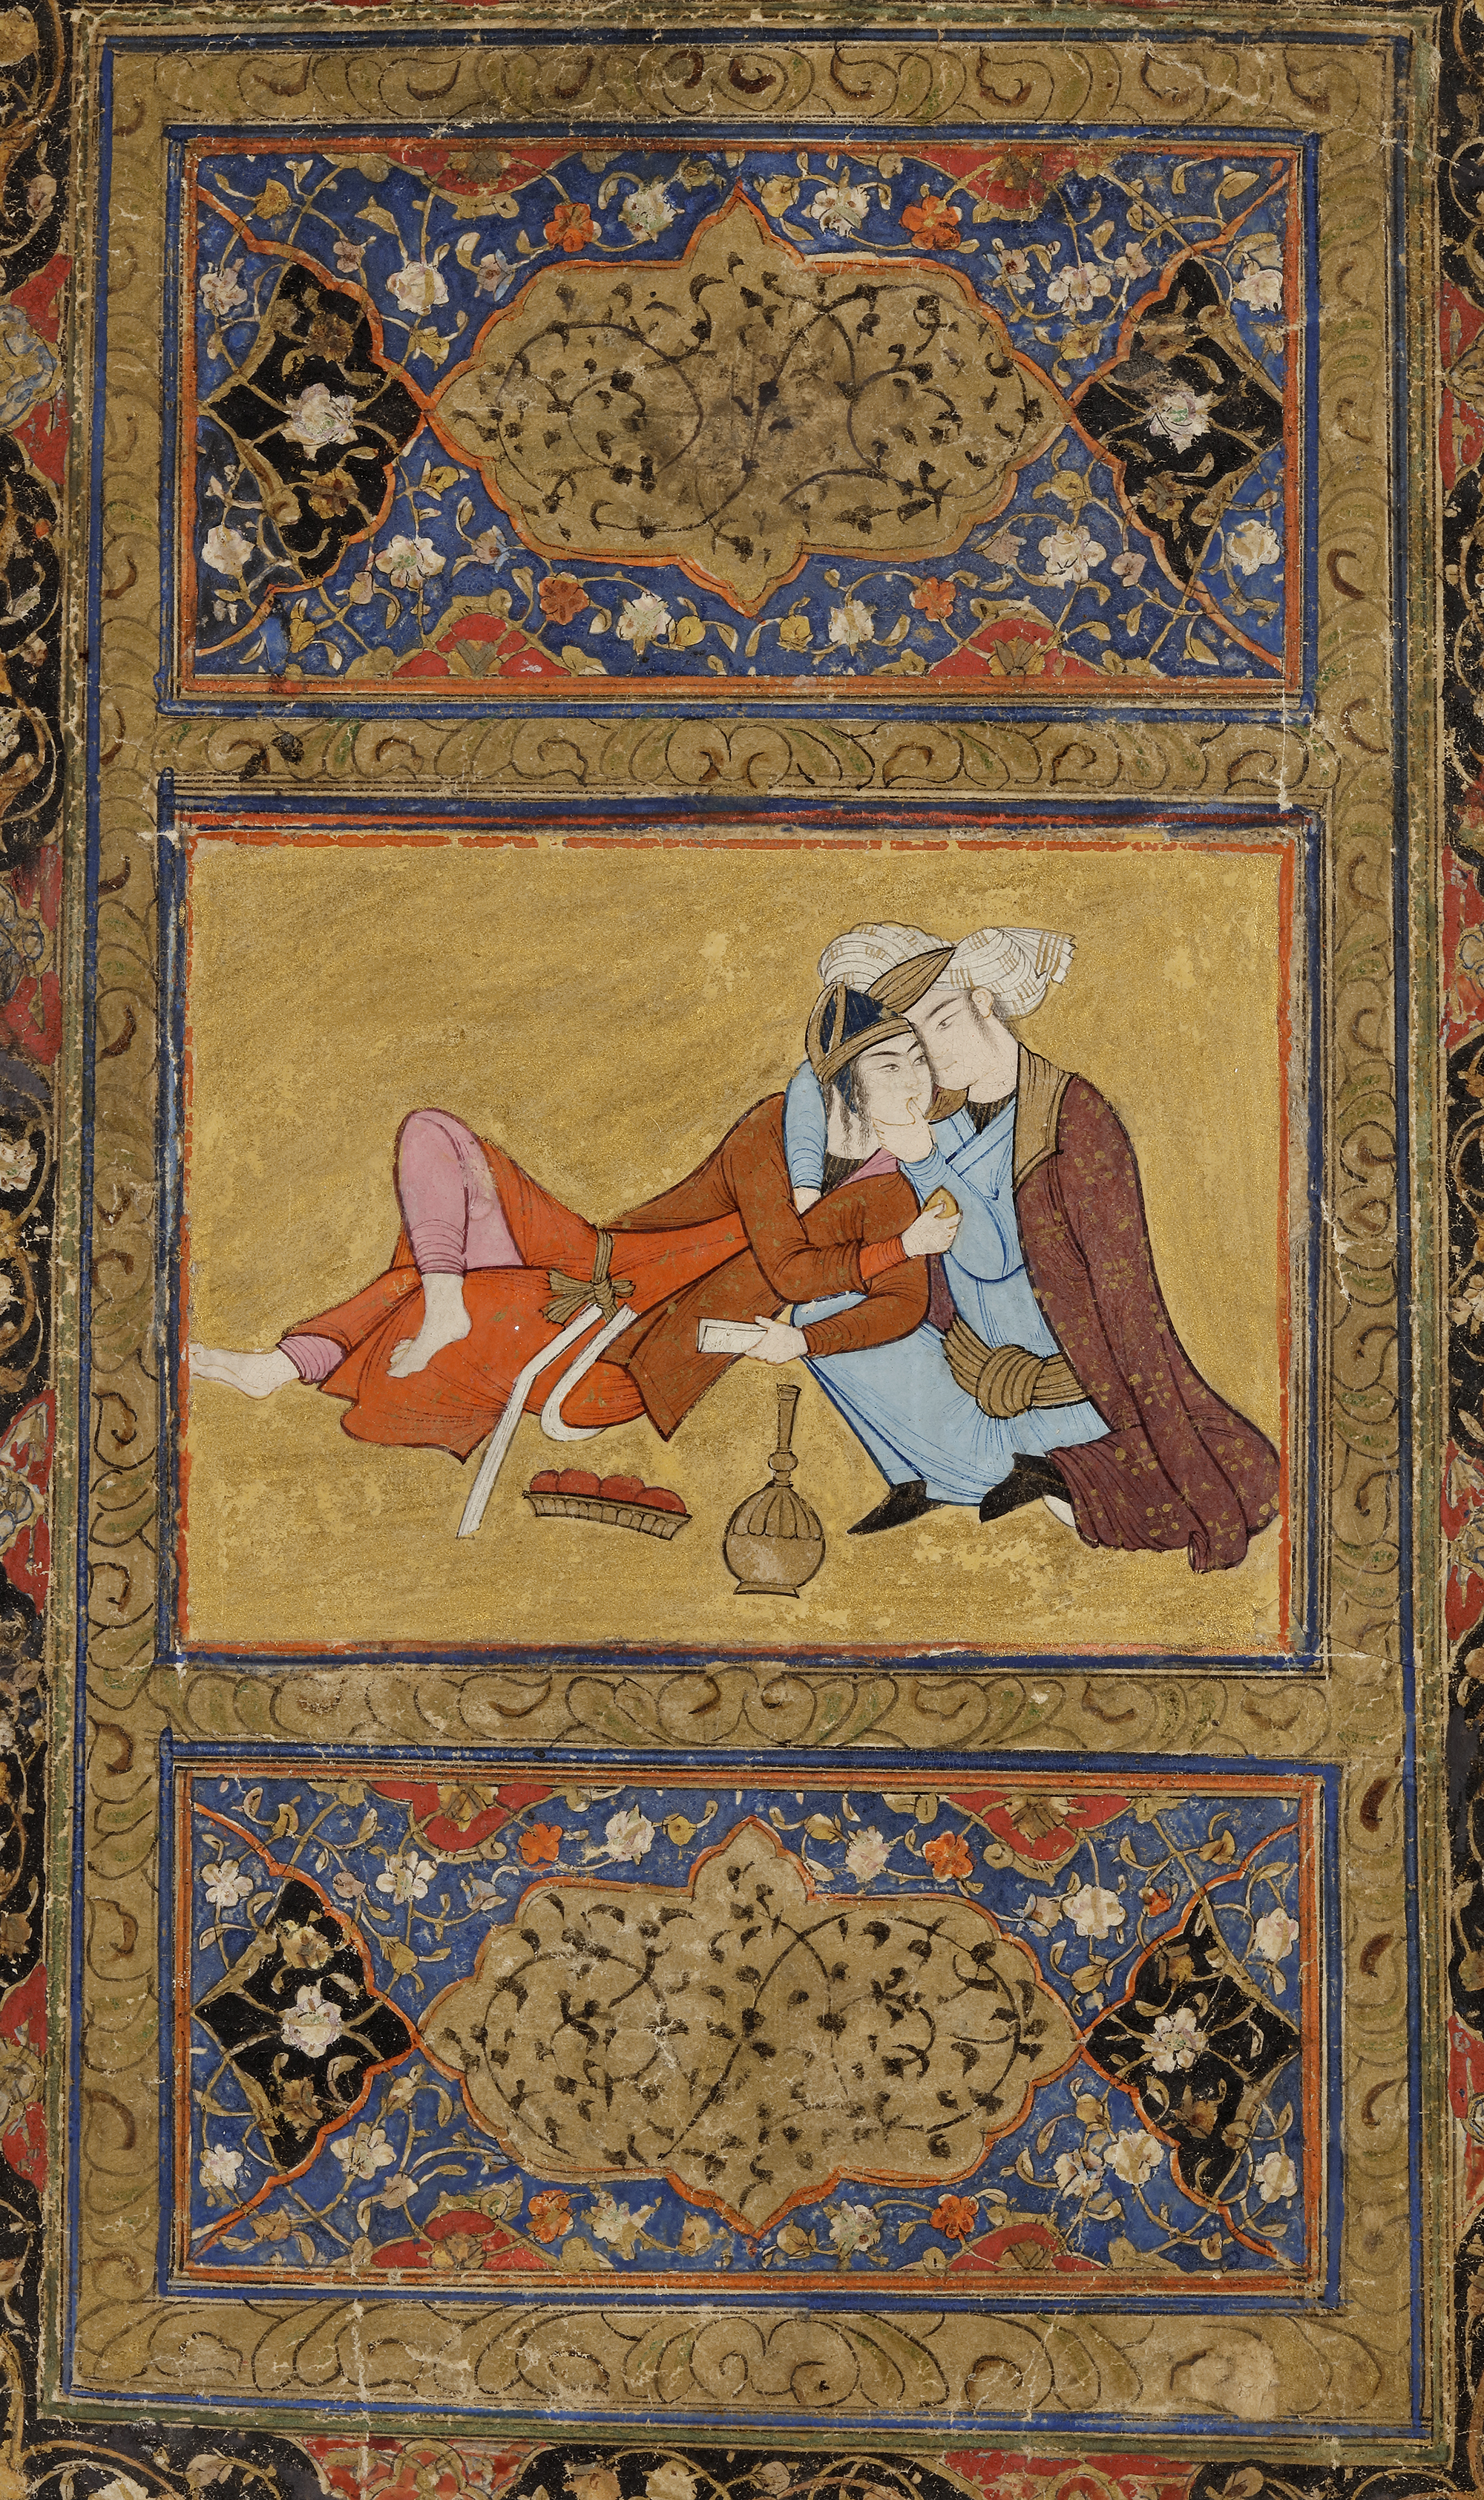 AN EMBRACING COUPLE, PERSIA, SAFAVID, 17TH CENTURY - Image 4 of 4